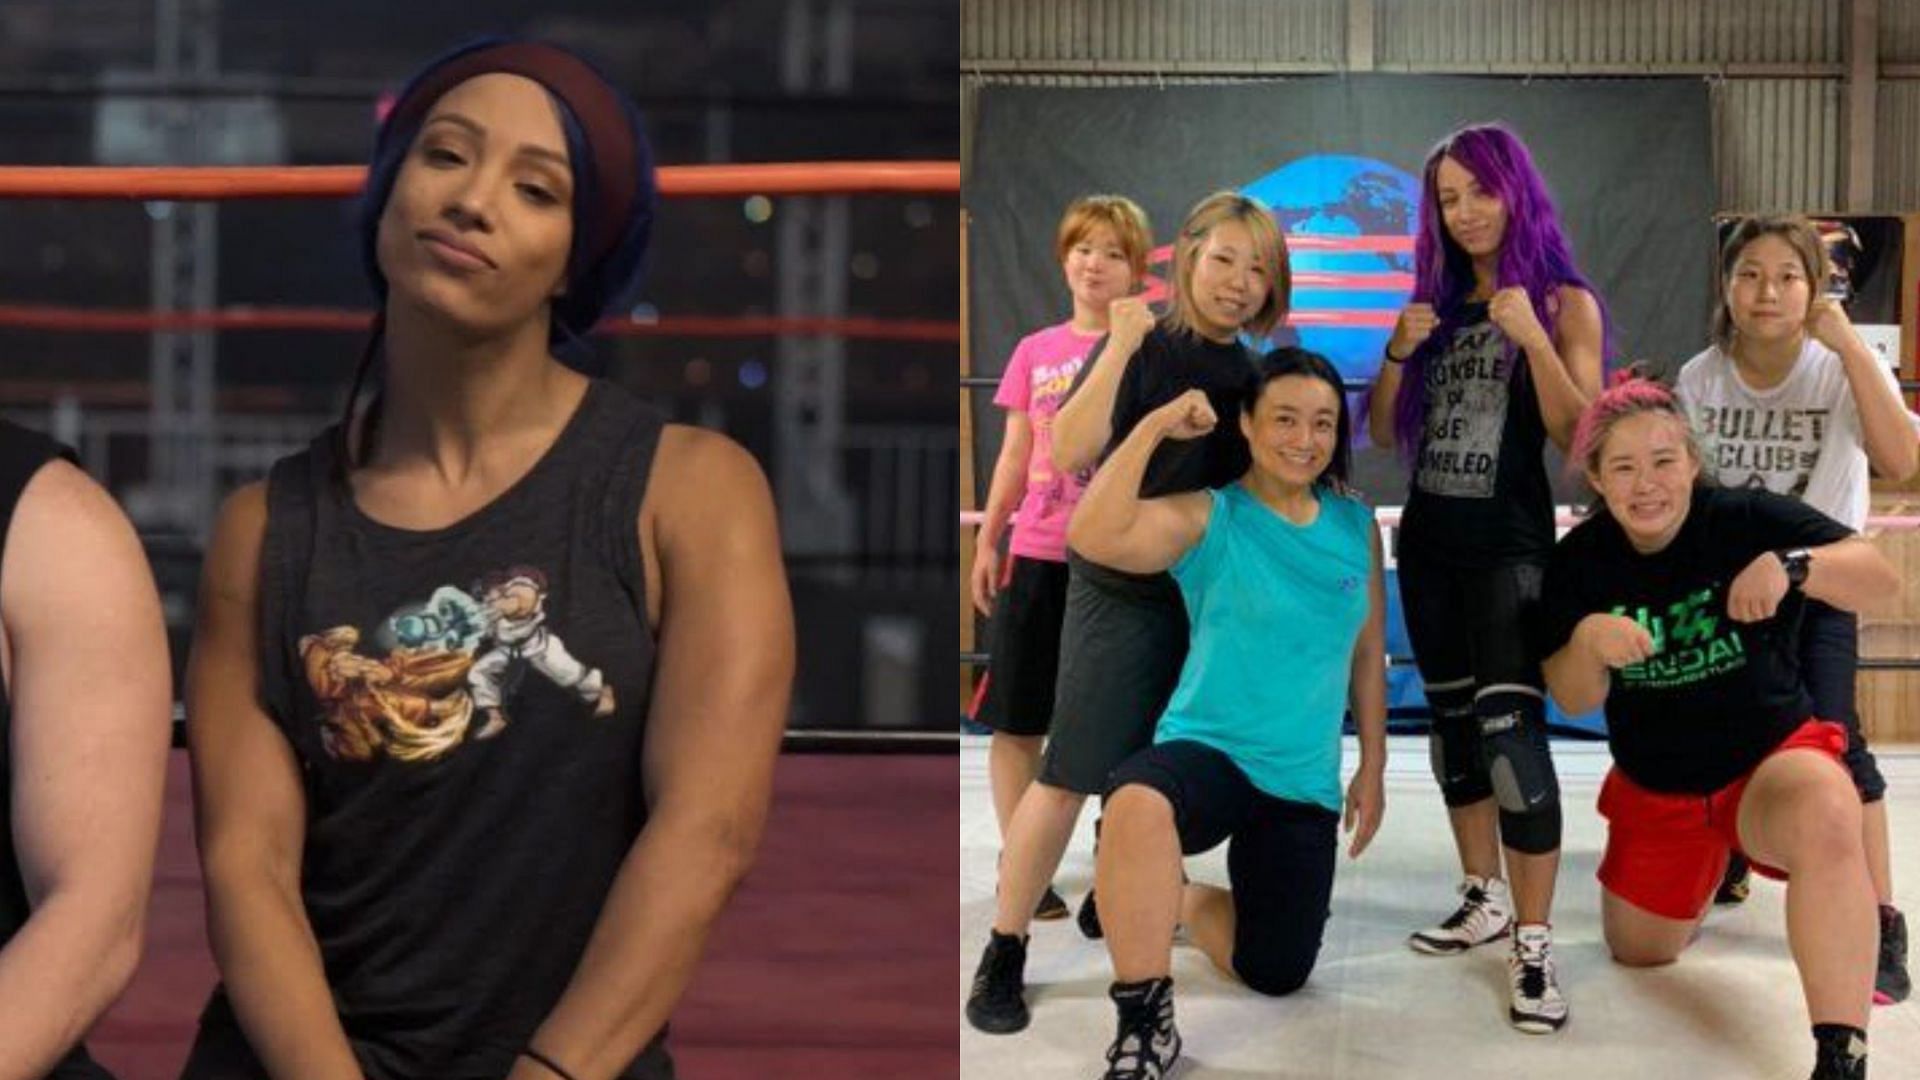 Sasha Banks could open a wrestling academy